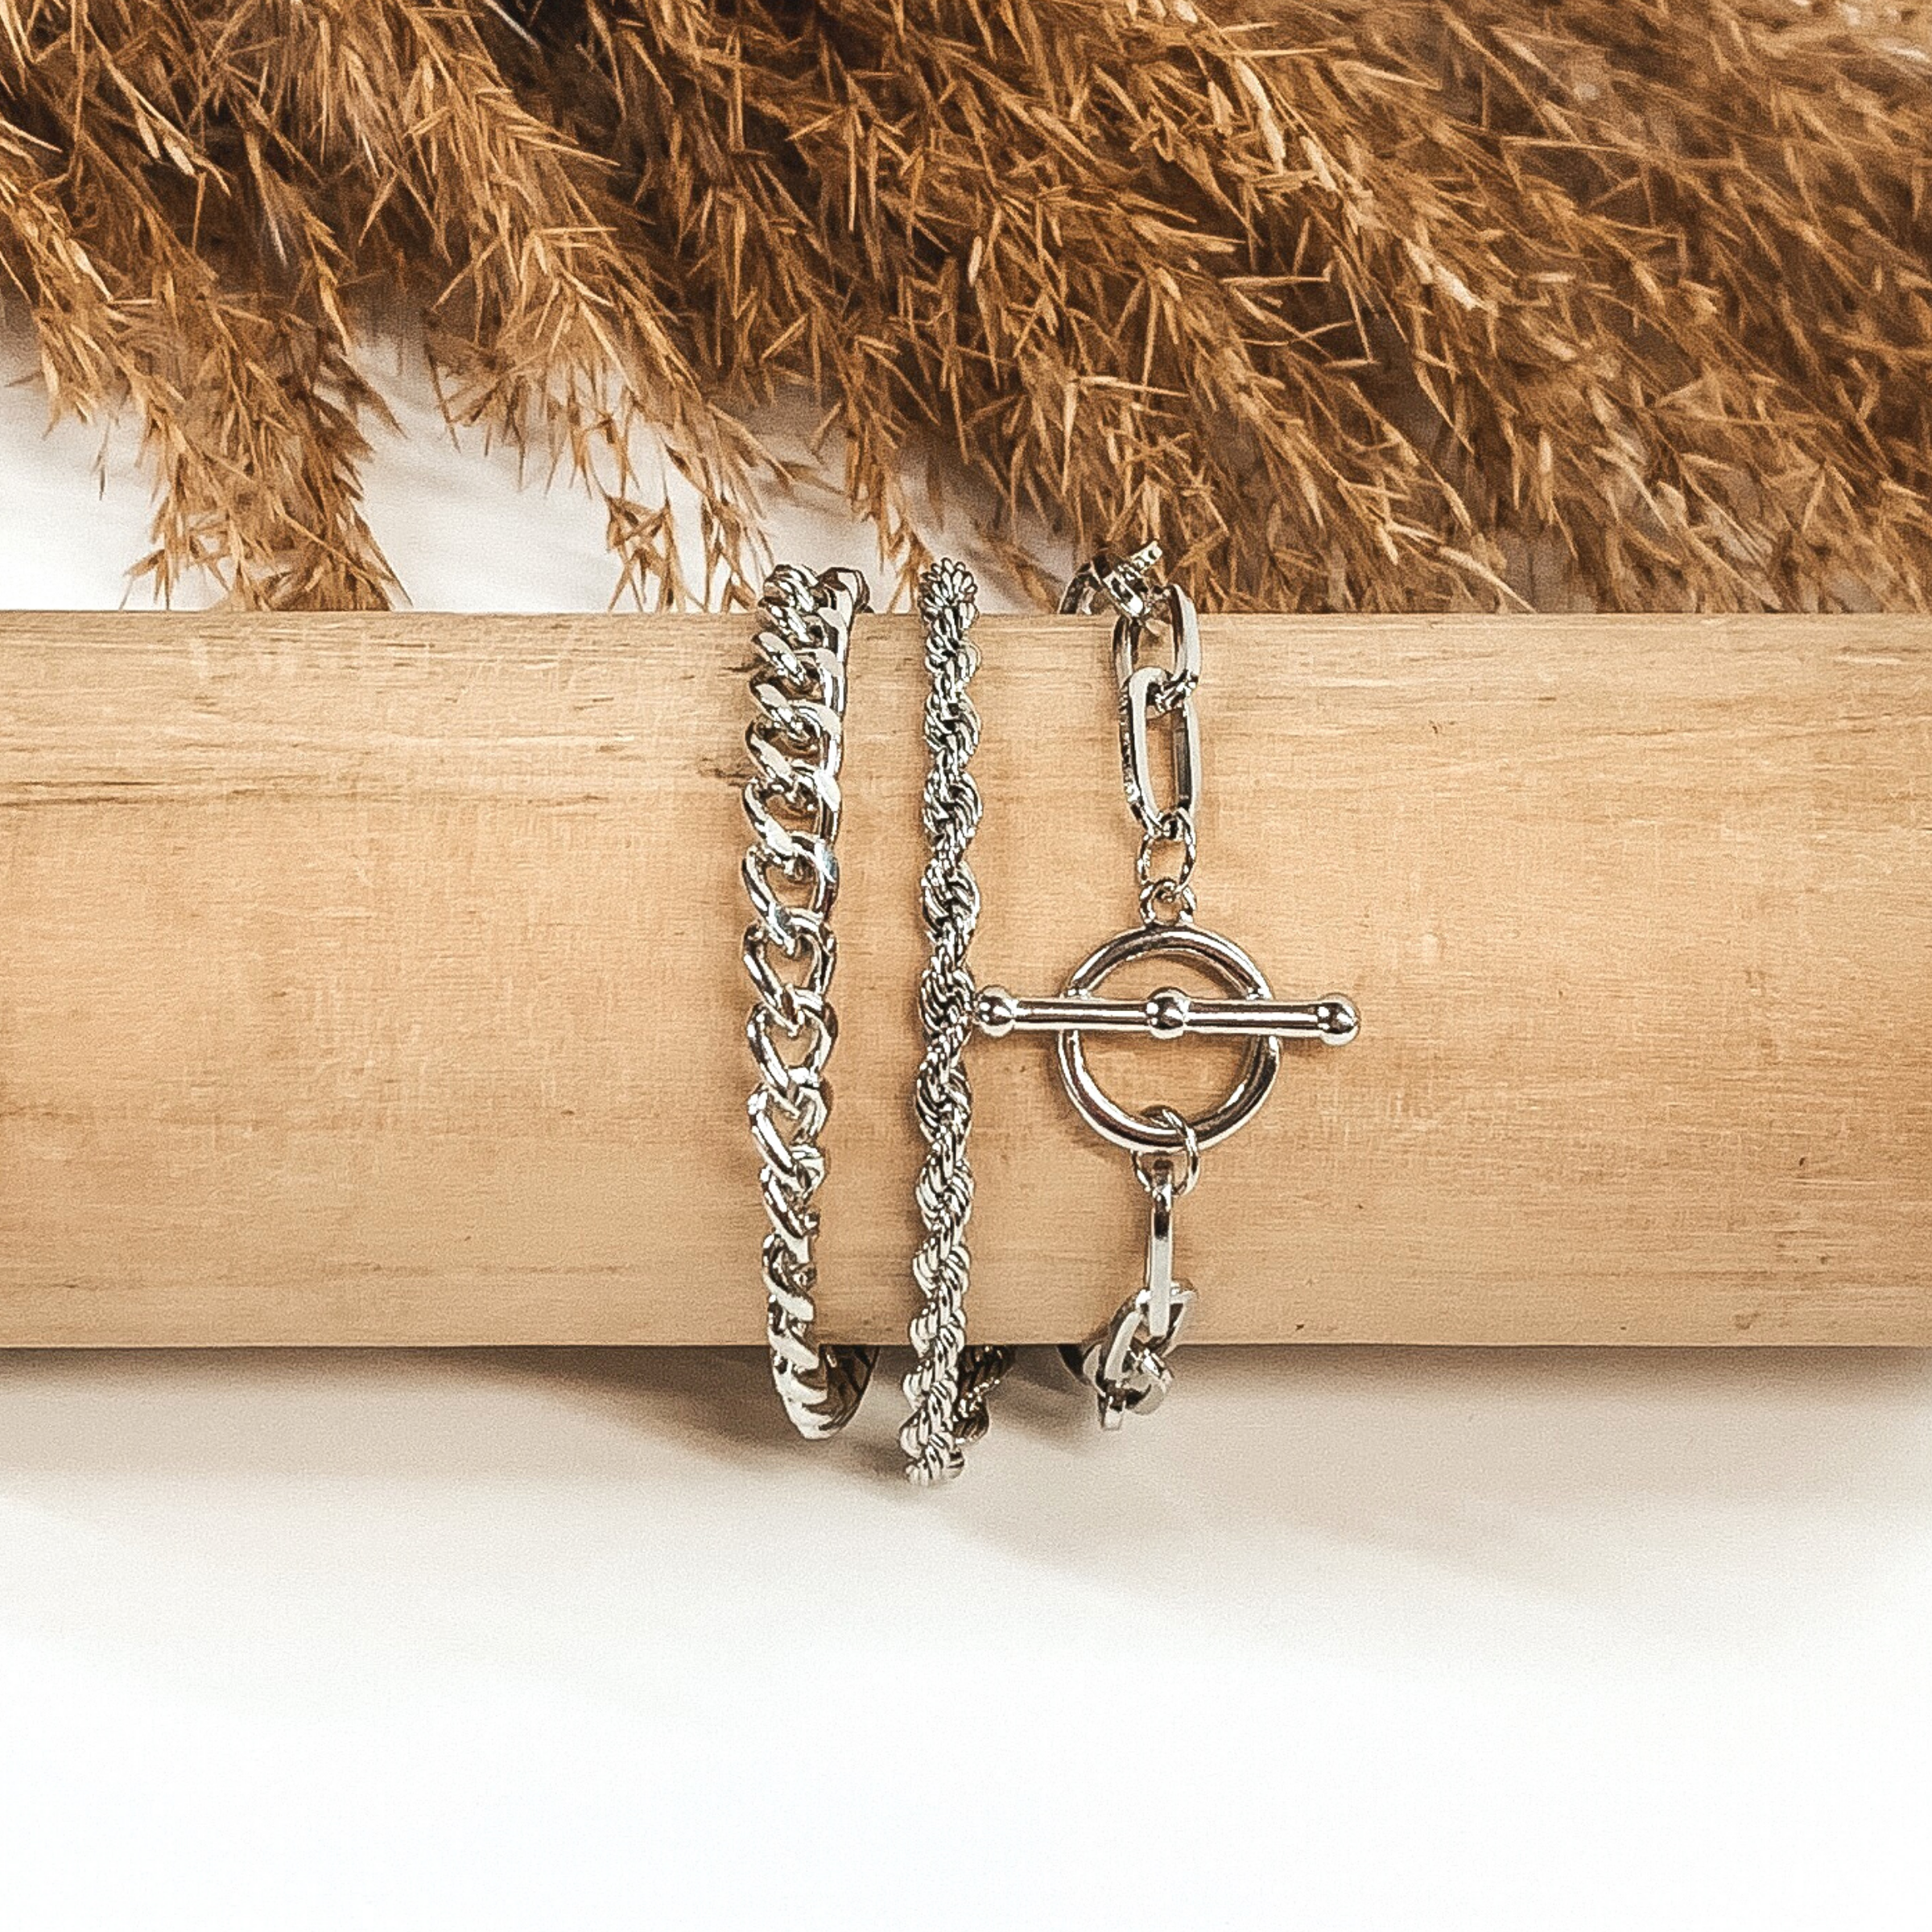 This is a three stranded silver, magnetic bracelet that includes a curb chain, a rope chain, and a paperclip chain with a toggle clasp pendant. This bracelet is pictured wrapped around a wooden bracelet holder on a white background with tan floral at the top of the picture.